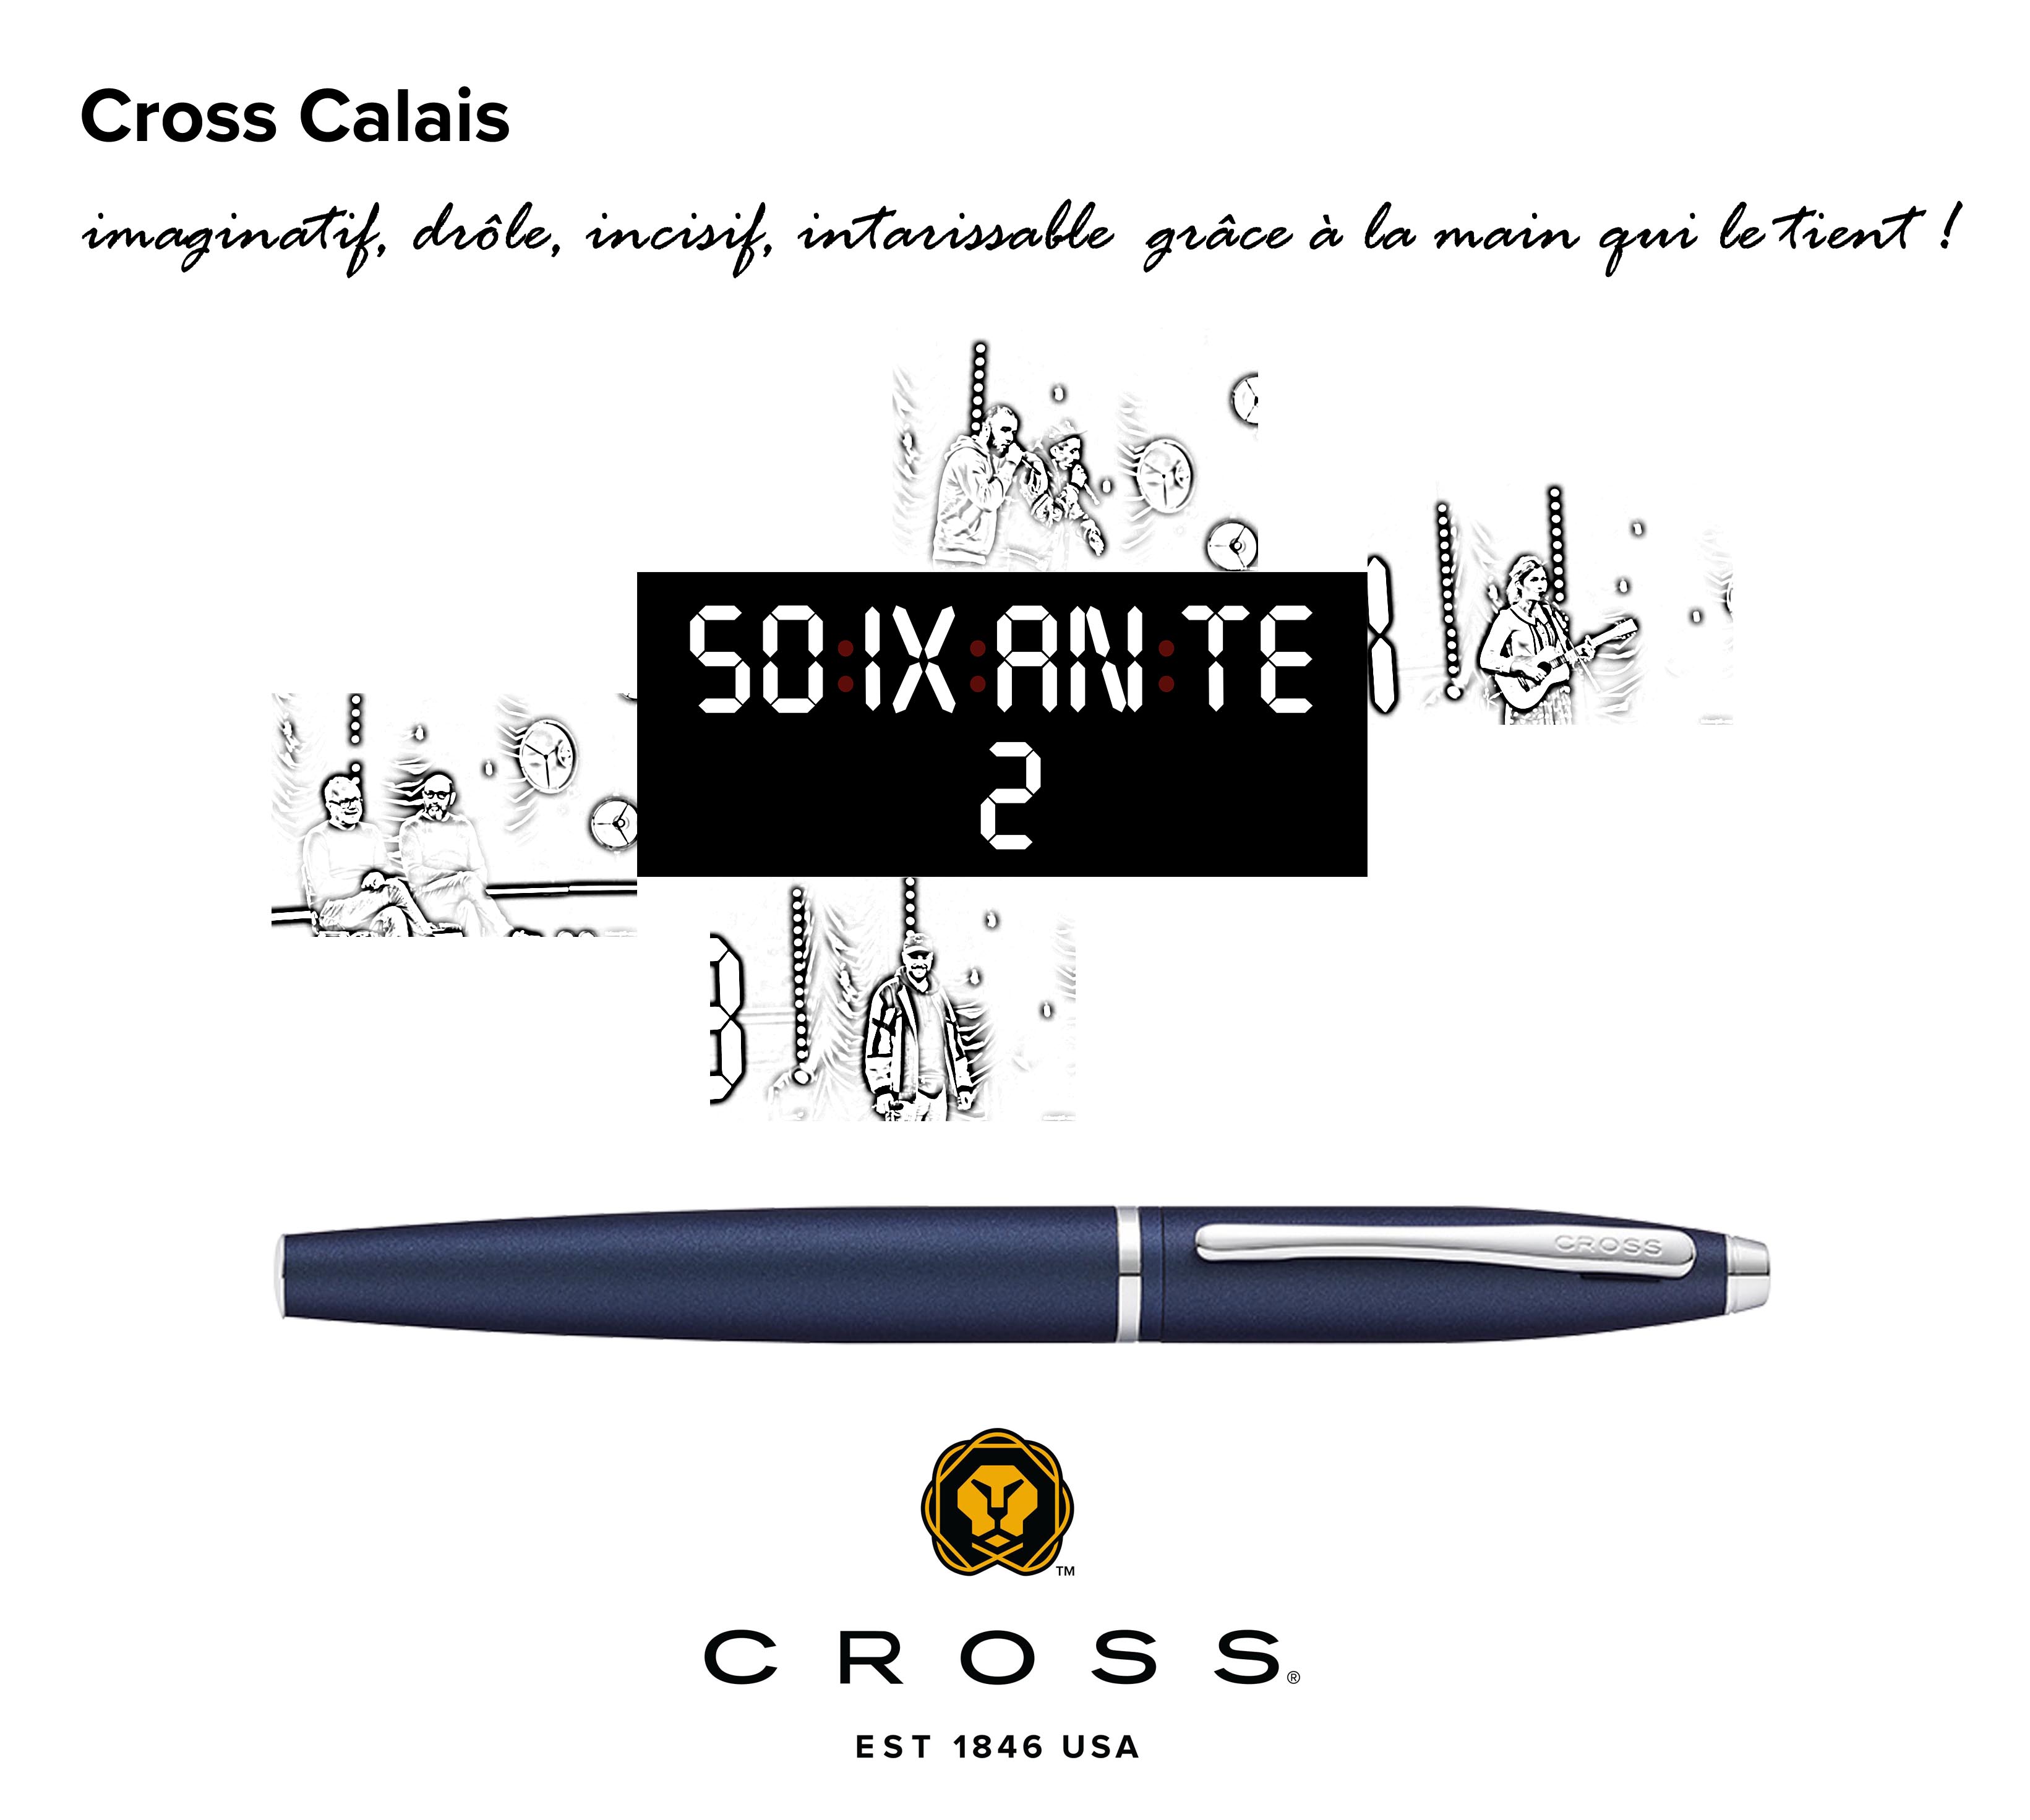 Cross, sponsor of the Soixante programme on Canal+.